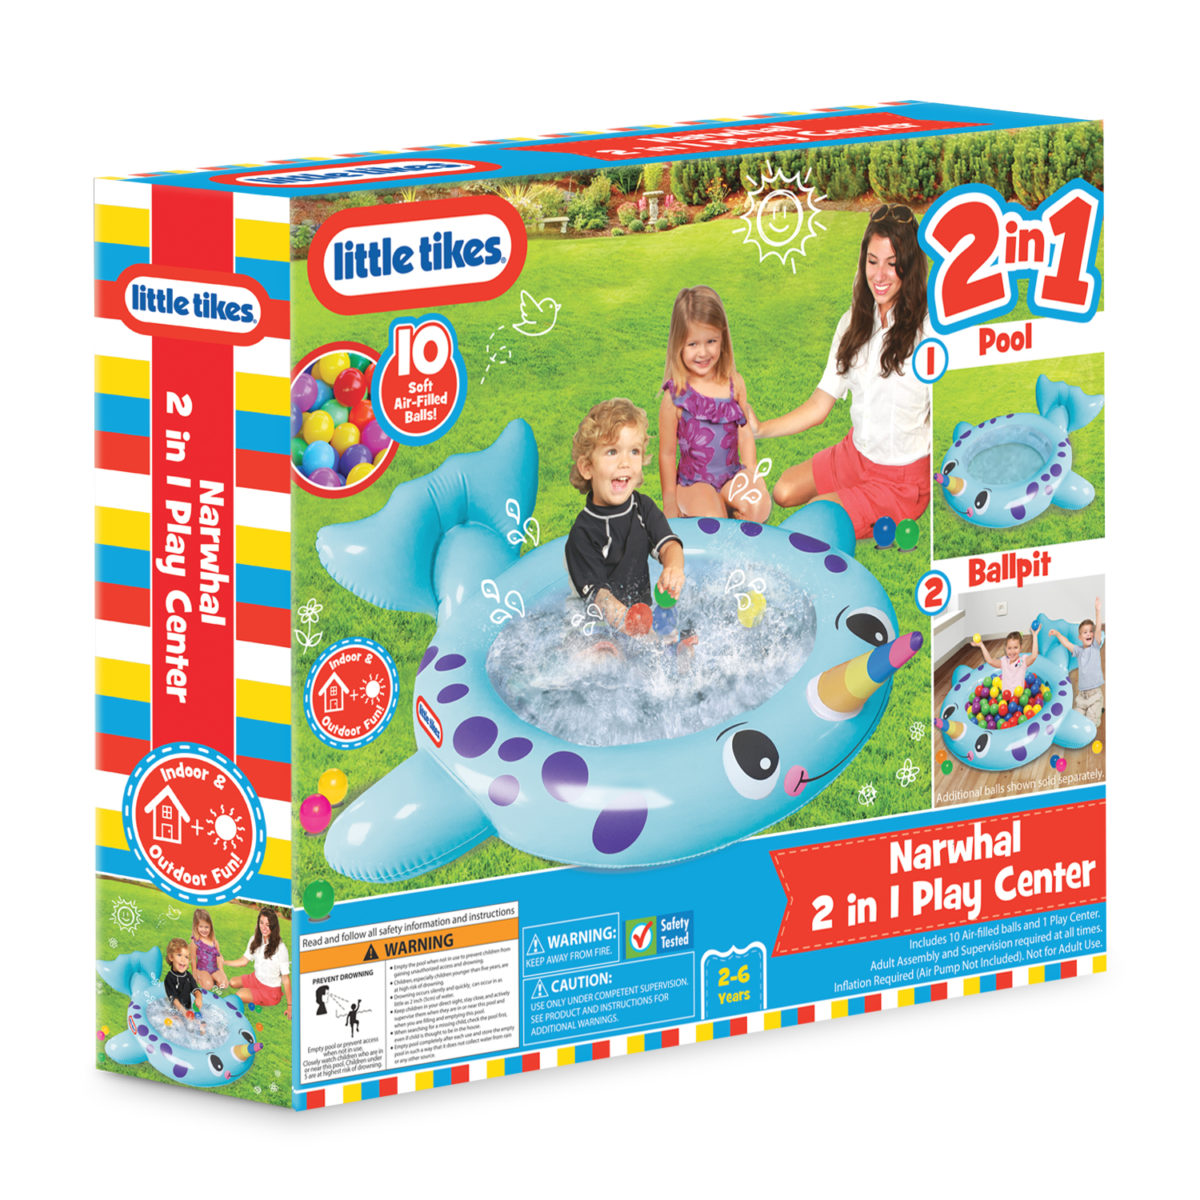 LITTLE TIKES 2 IN 1 PLAY CENTER ONLY $9.59